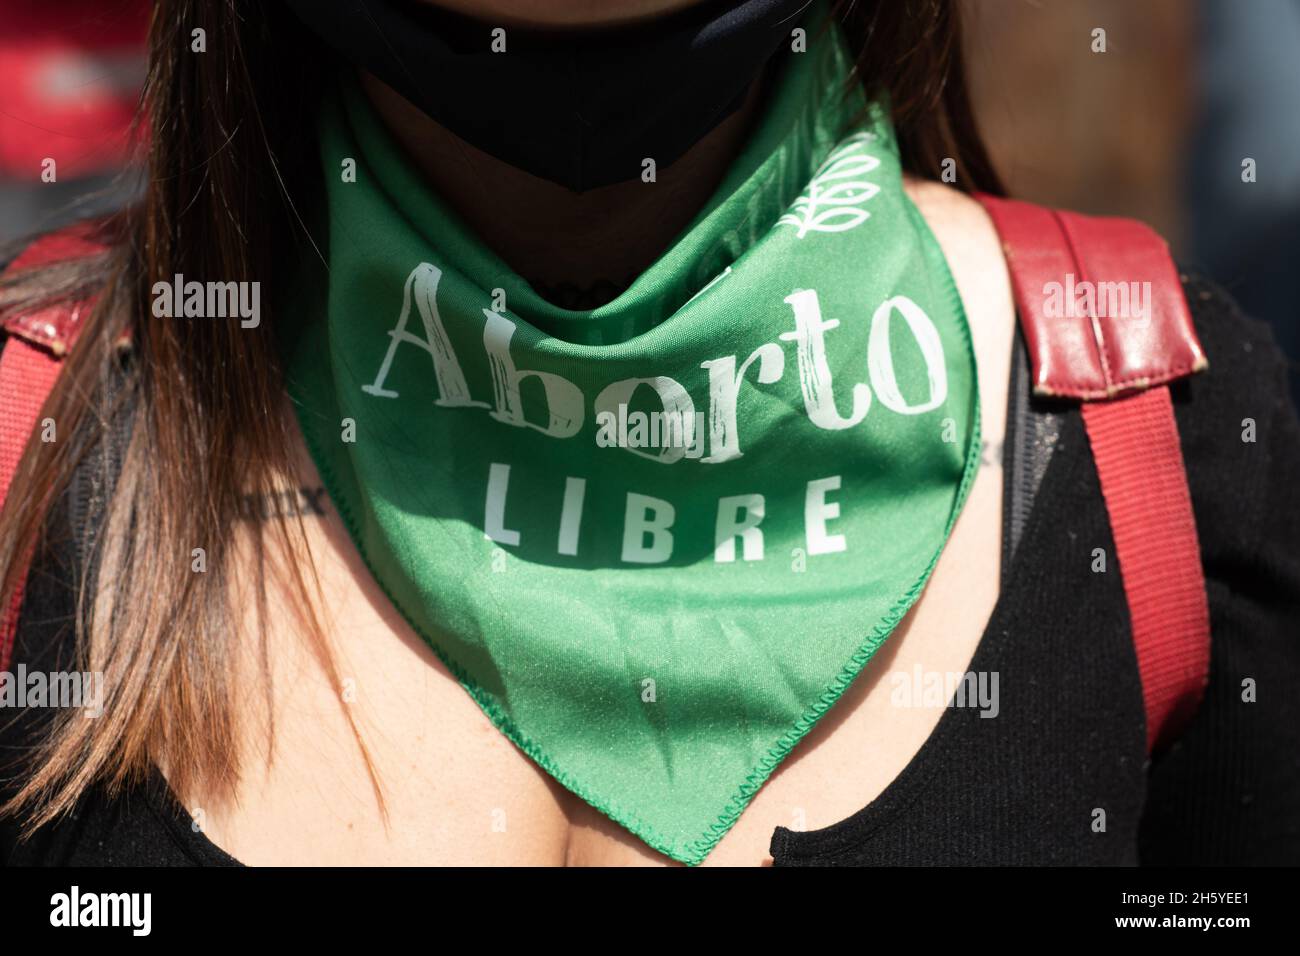 Bogota, Colombia. 11th Nov, 2021. A demonstrator has a scarf that reads 'Freedom for abortions' as activists from feminist and pro-abortion groups participate in a demonstration in support of the ldecriminalization of Abortions outside the Colombian Constitutional Court house in Bogota, Colombia on November 11, 2021. Credit: Long Visual Press/Alamy Live News Stock Photo